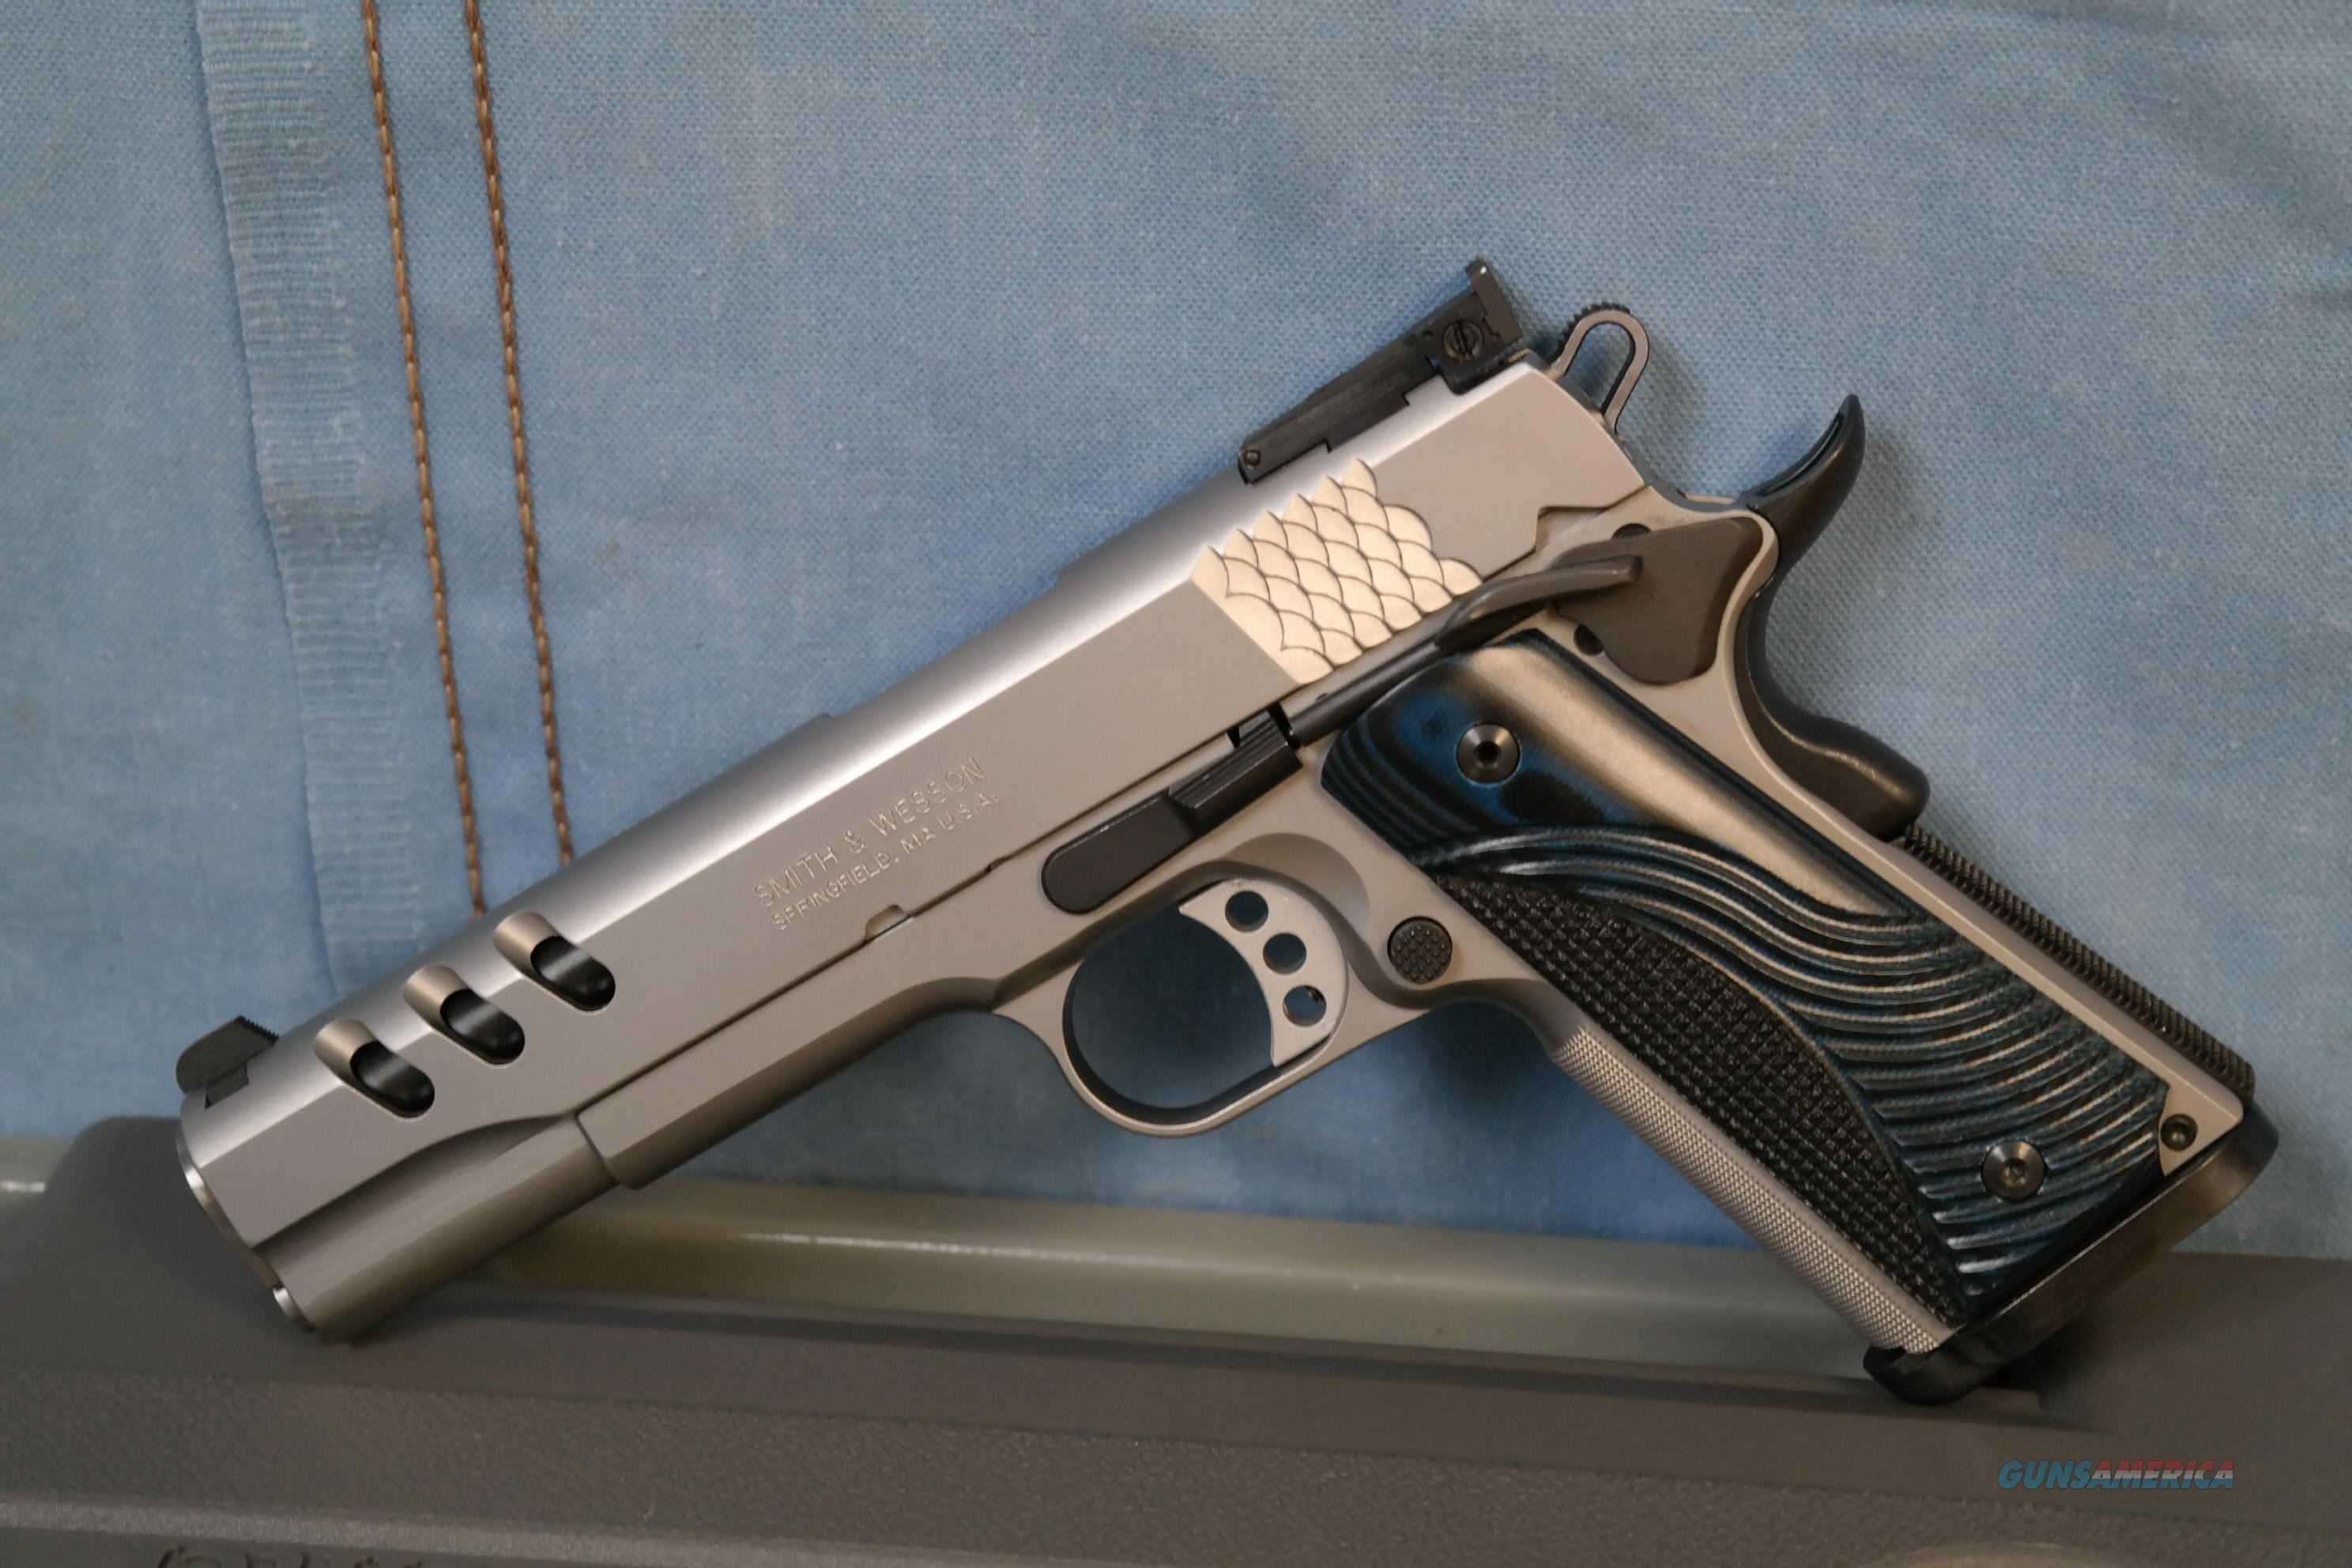 S W 170343 Performance Center 1911 For Sale At Gunsamerica